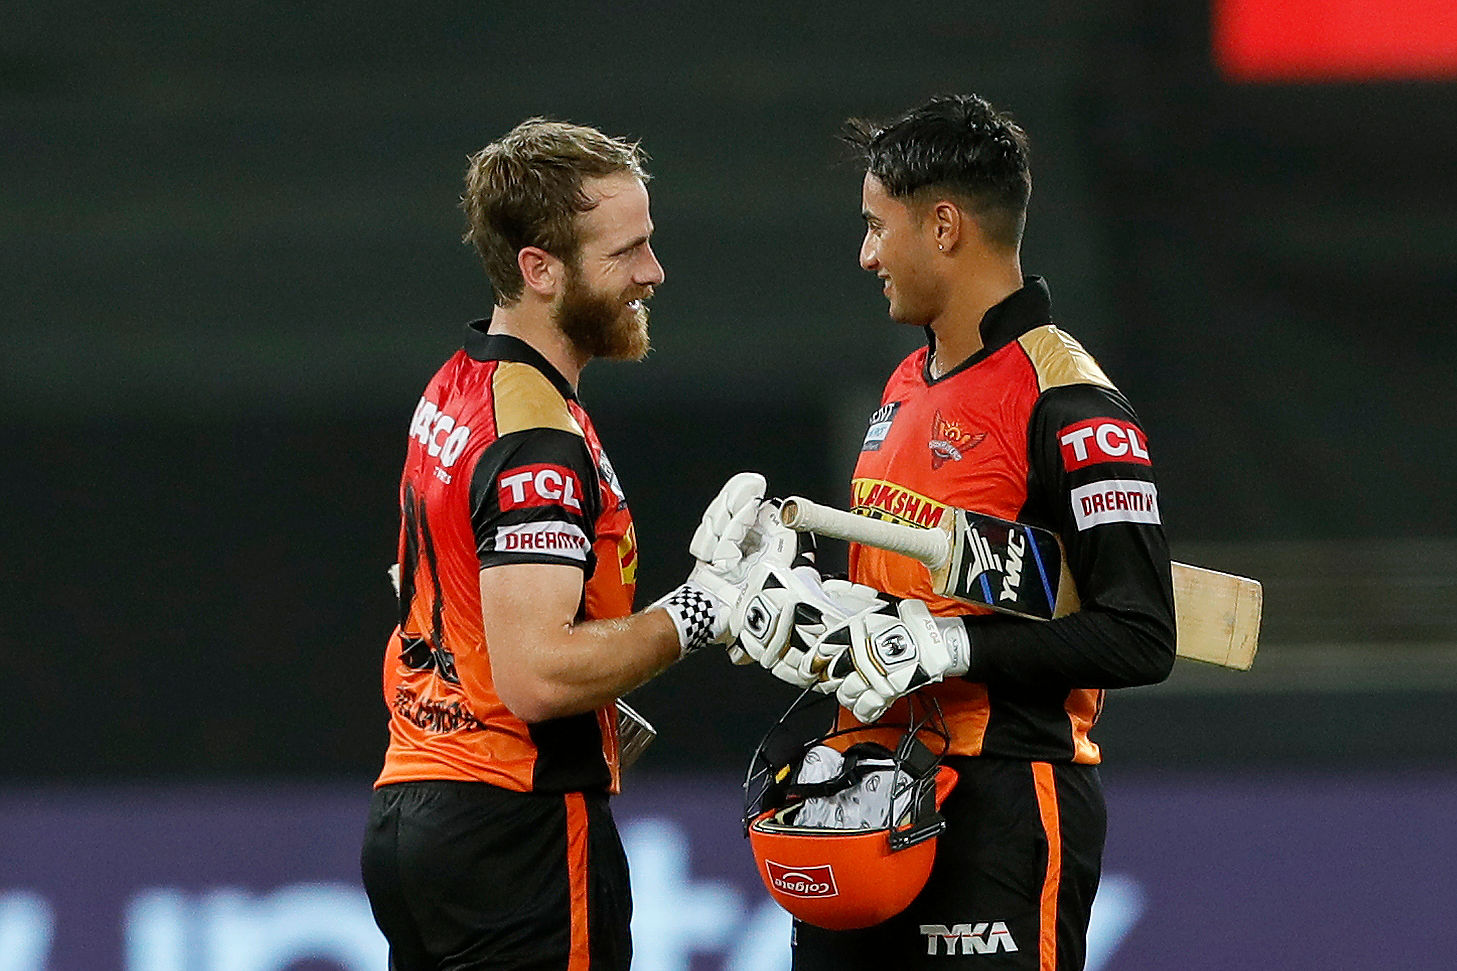 Play with a smile: SRH captain Williamson on getting back to winning ways